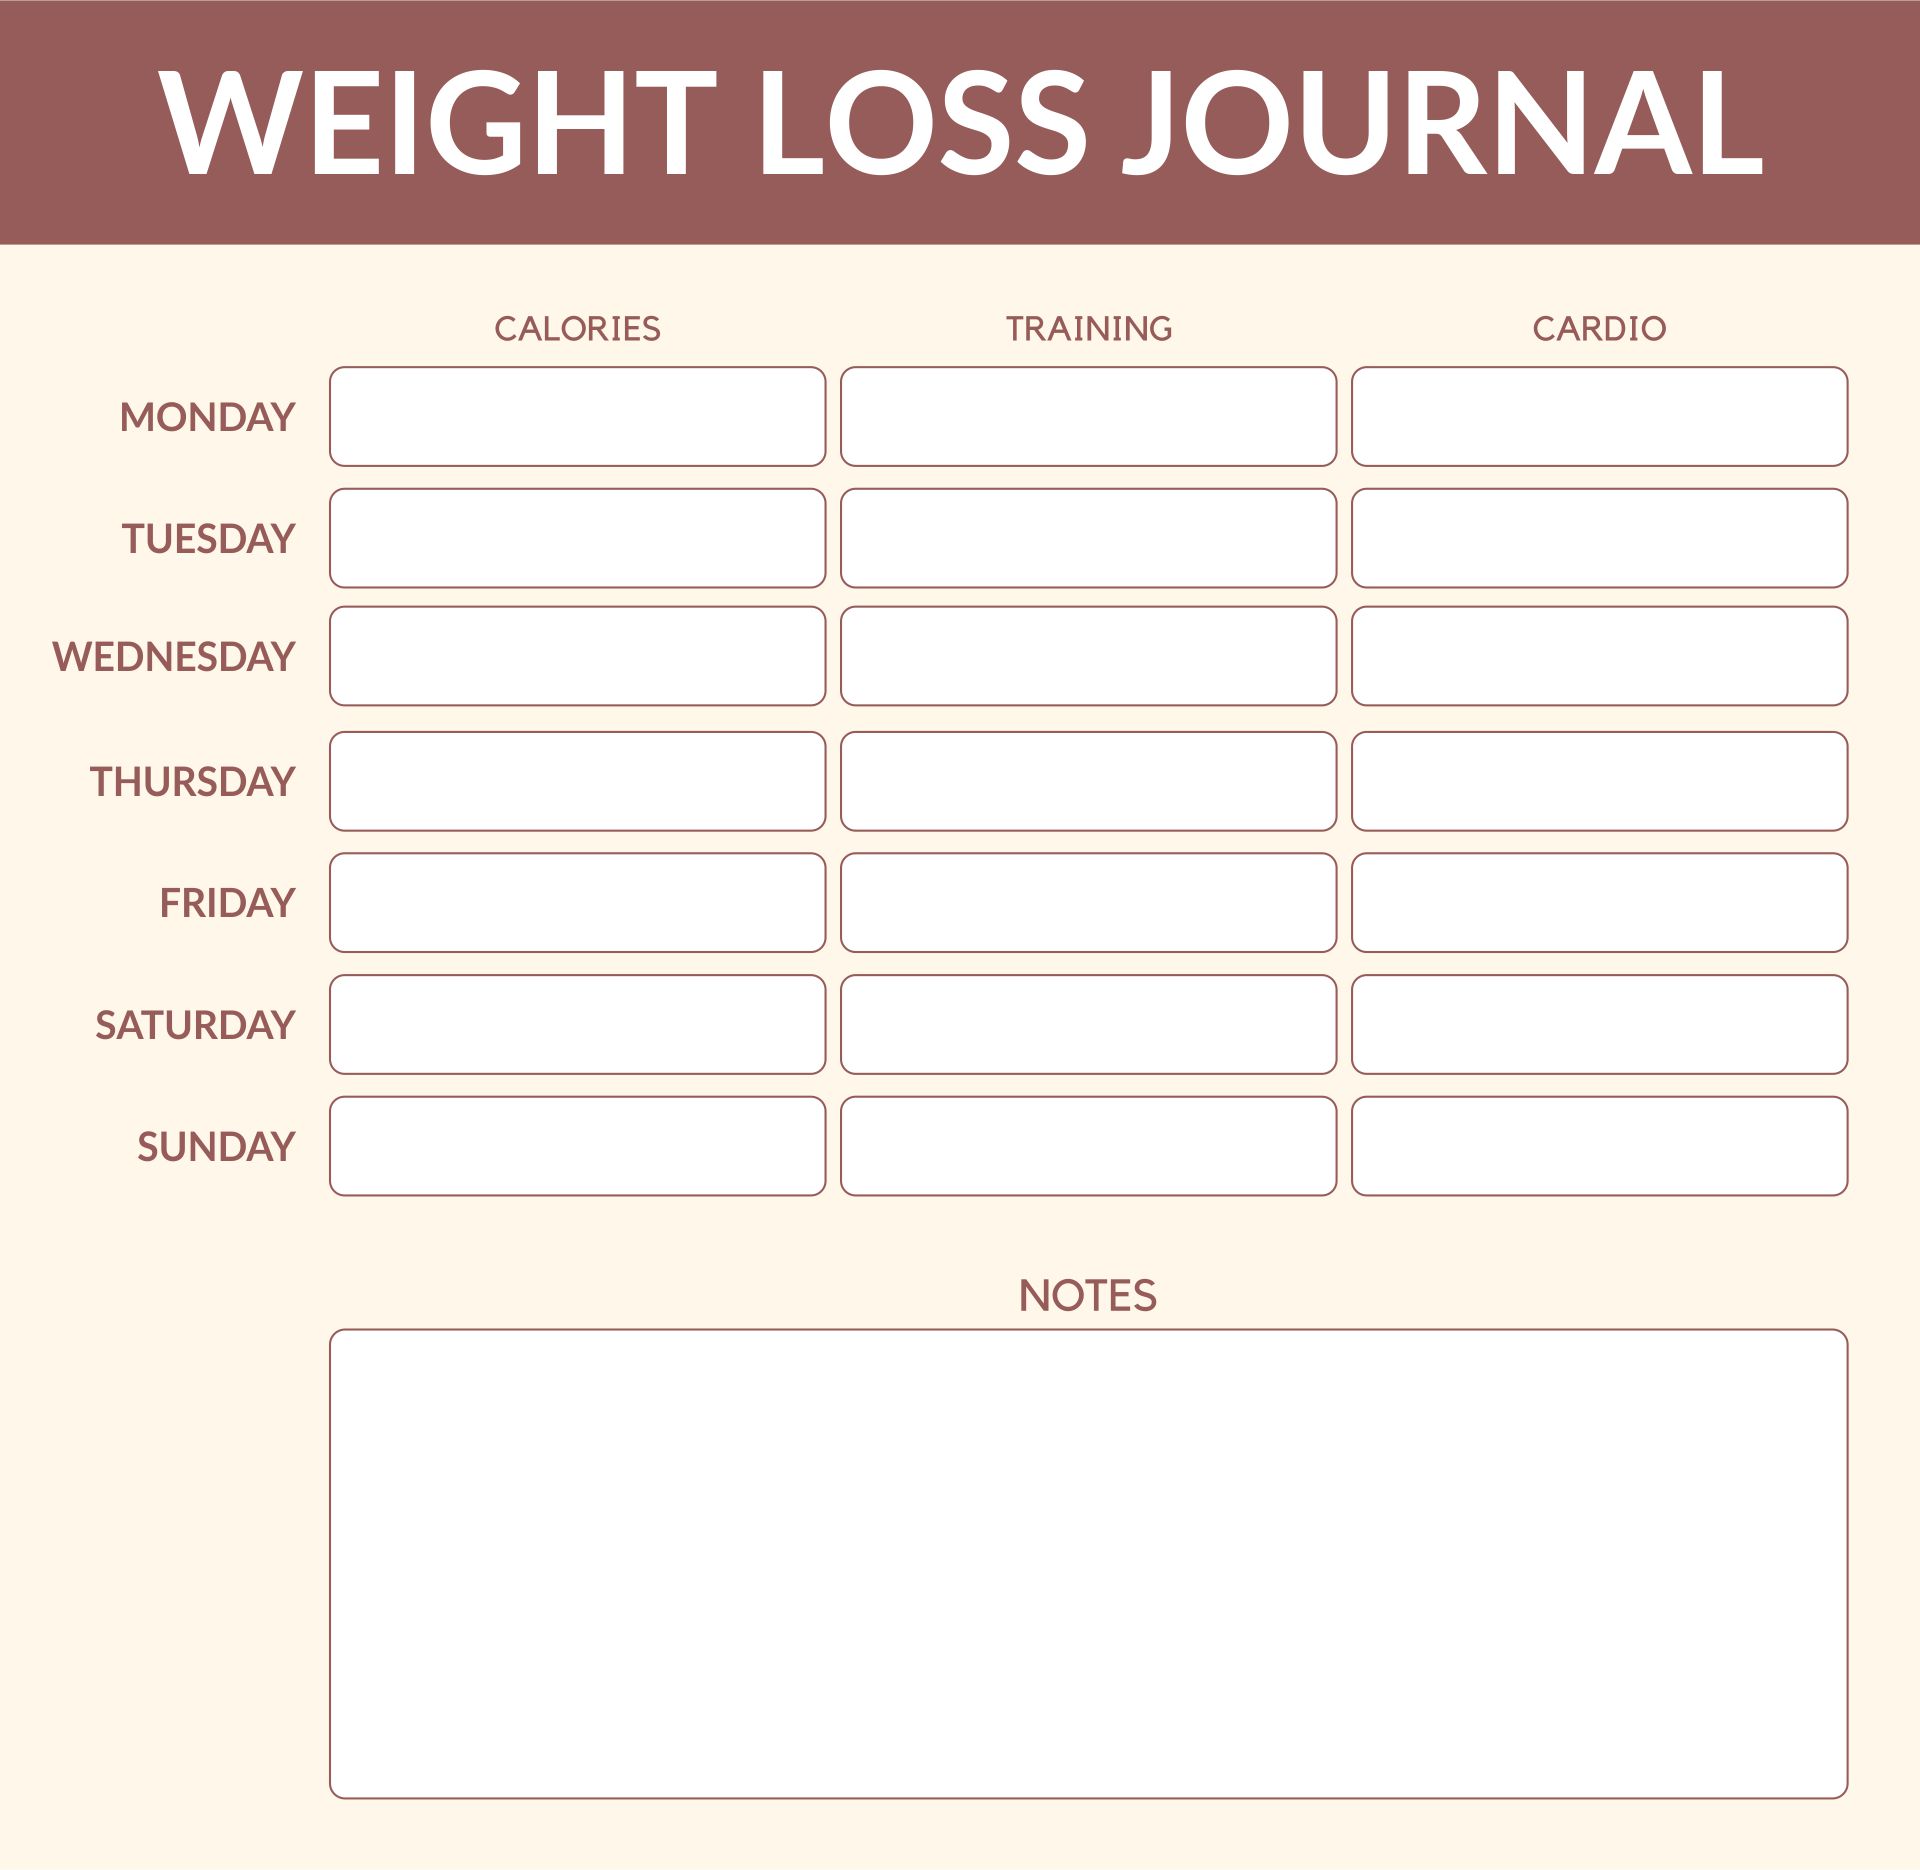 8-best-images-of-weight-loss-journal-template-printable-free